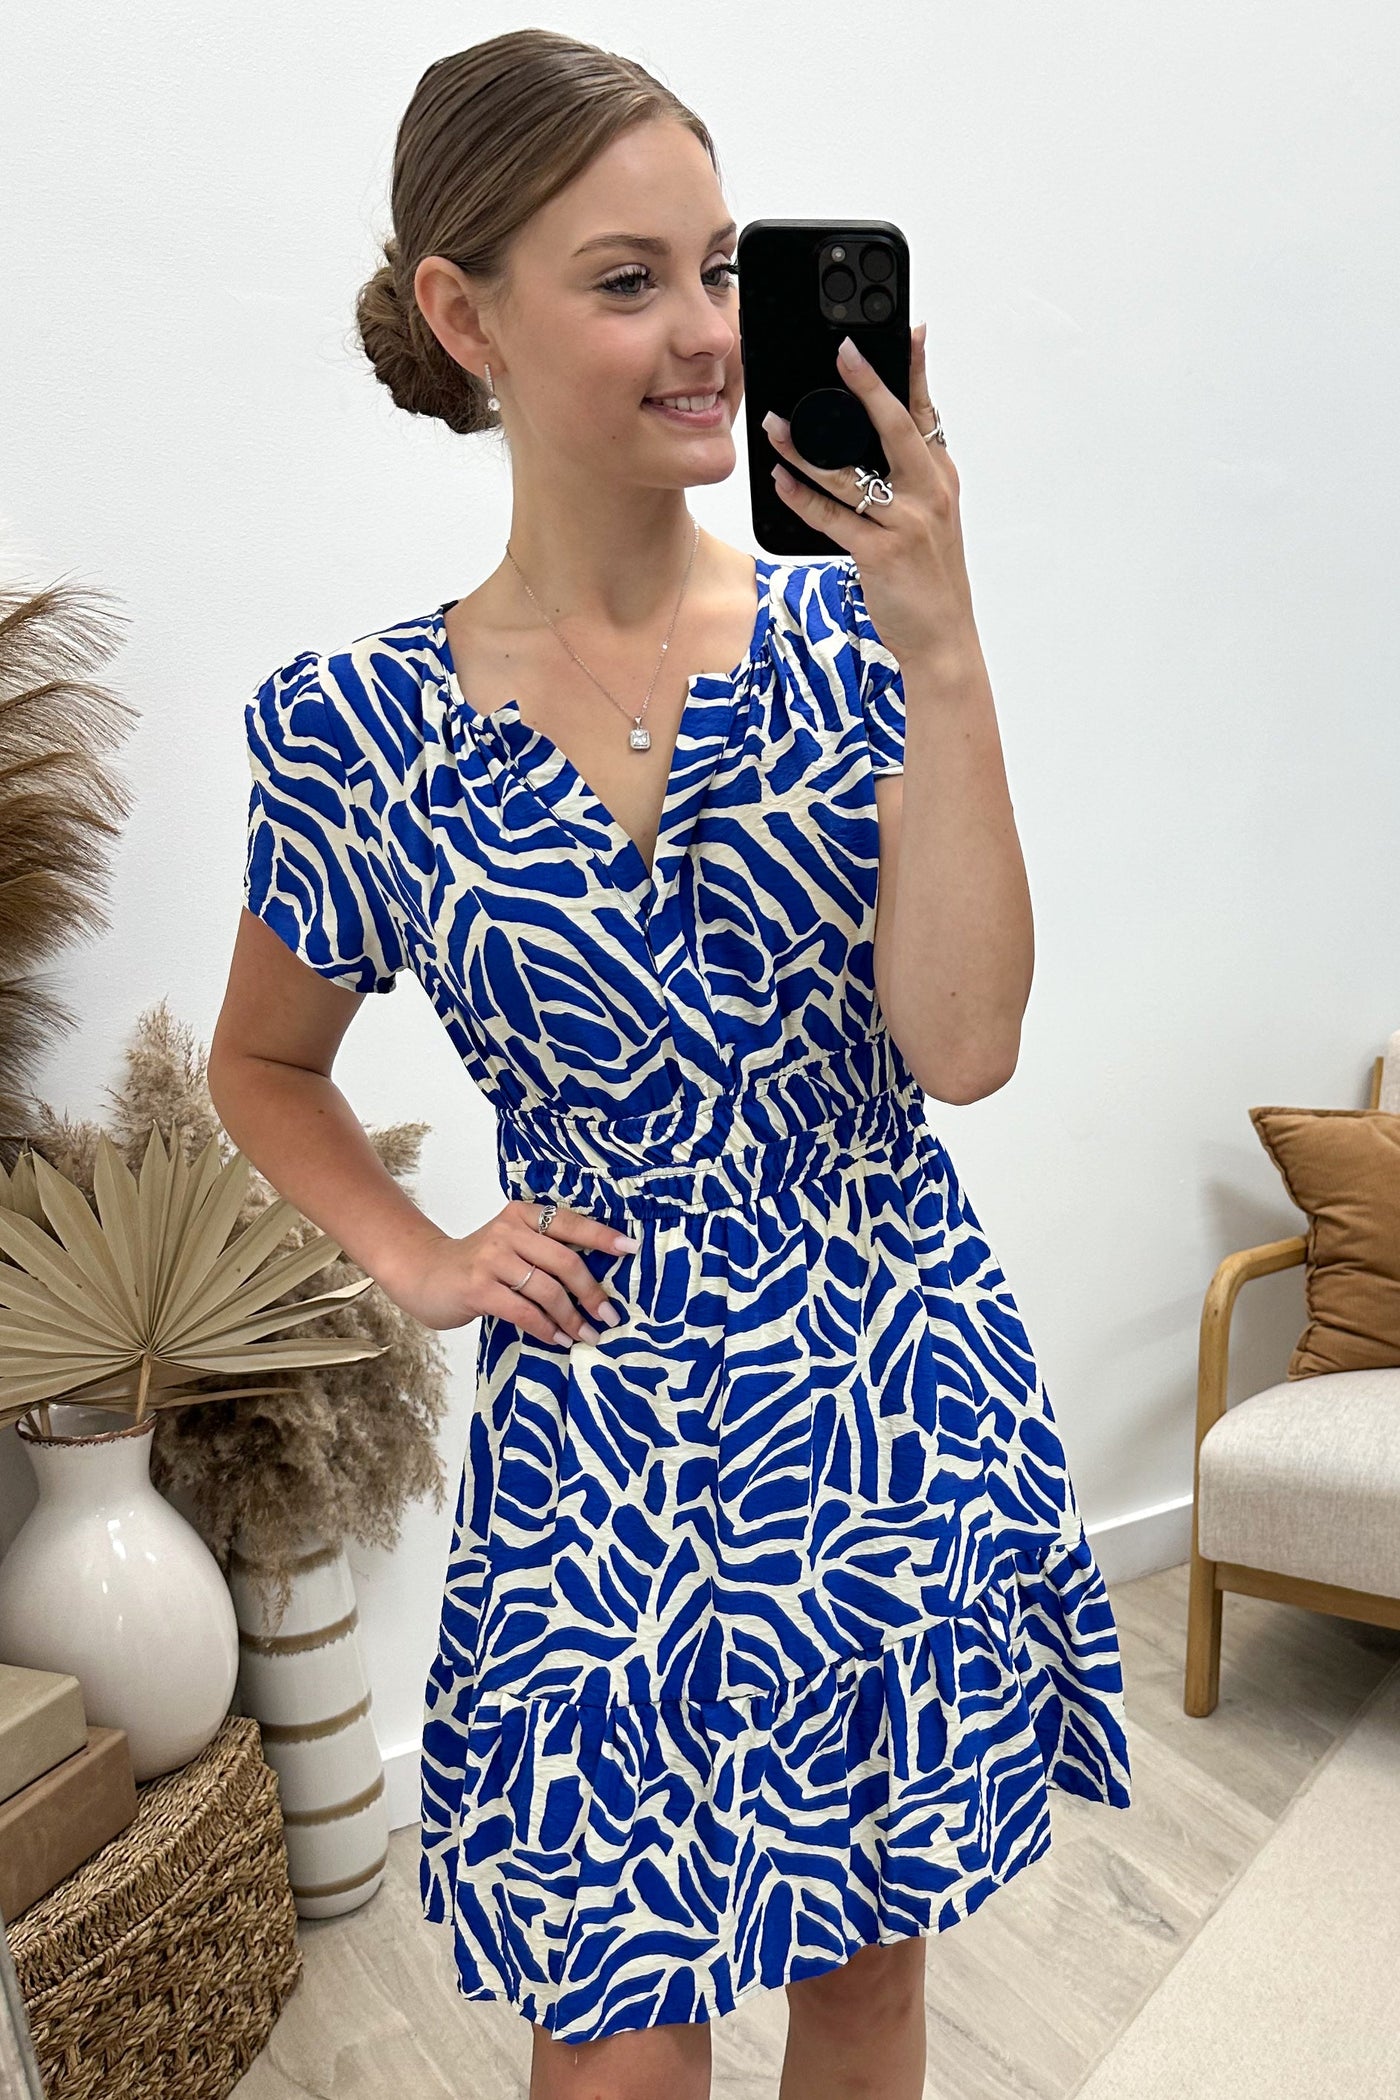 "Big Feelings" Dress (Blue/Ivory) - Happily Ever Aften